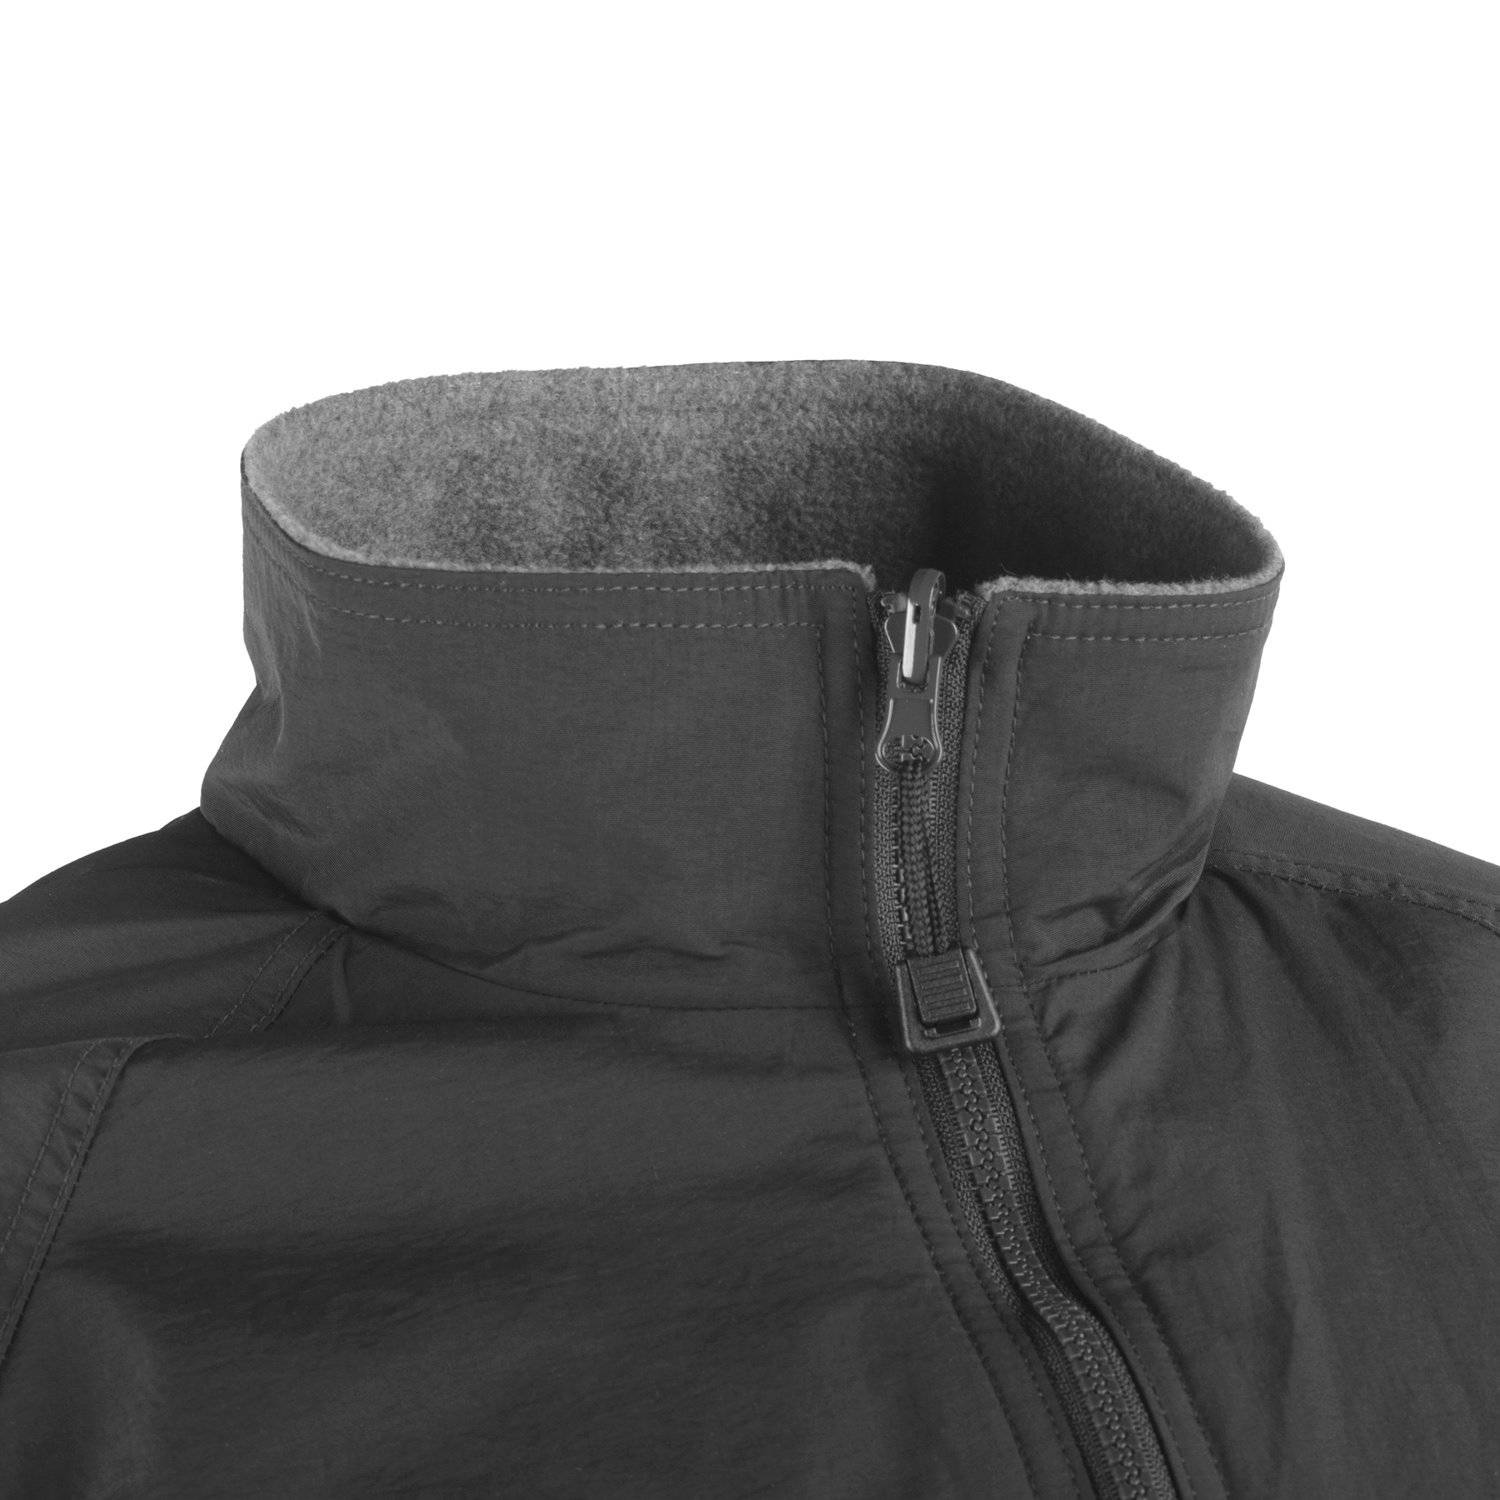 Galls Heavyweight System Galls Insulated Jackets